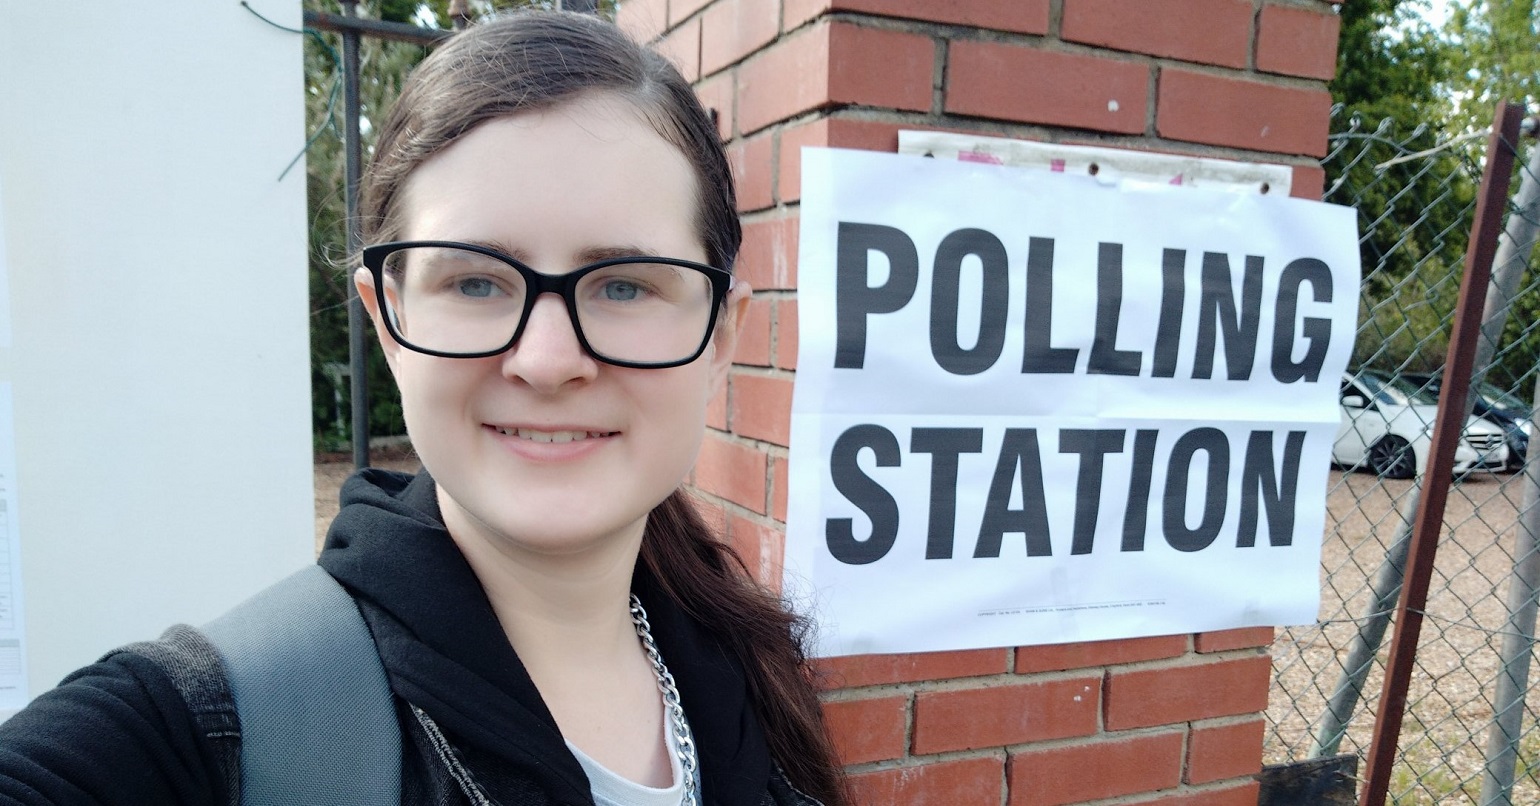 Natalia Kubica standing in front of a polling station sign